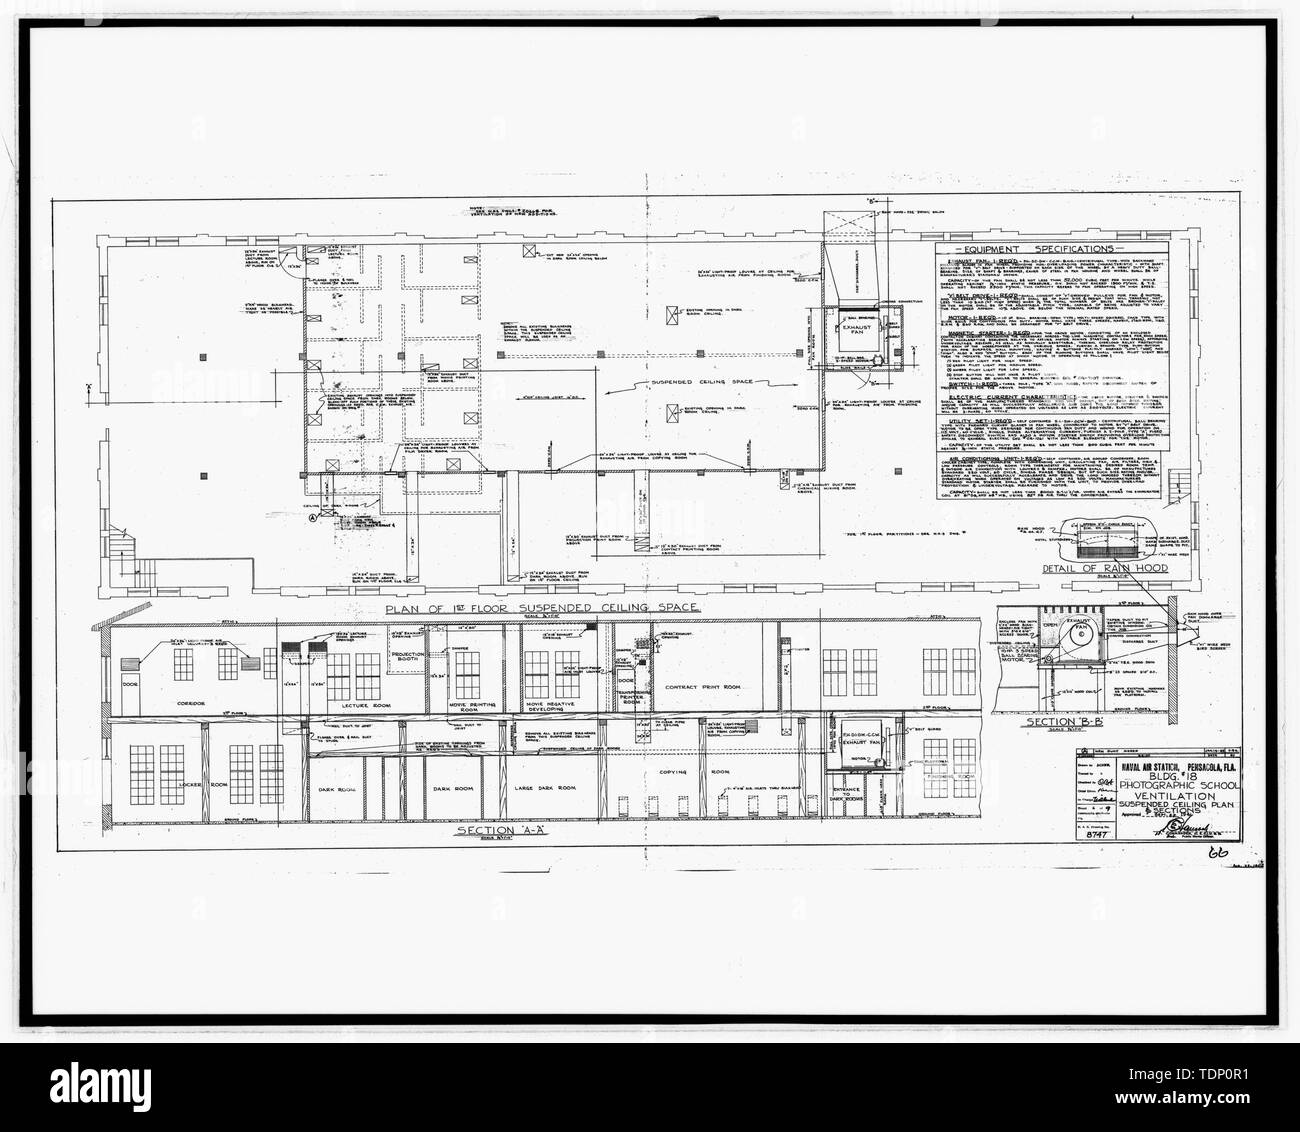 Photocopy Of Drawing This Photograph Is An 8 X 10 Copy Of An 8 X 10 Negative 1941 Original Architectural Drawing Located At Building No 458 Nas Pensacola Florida Building No 18